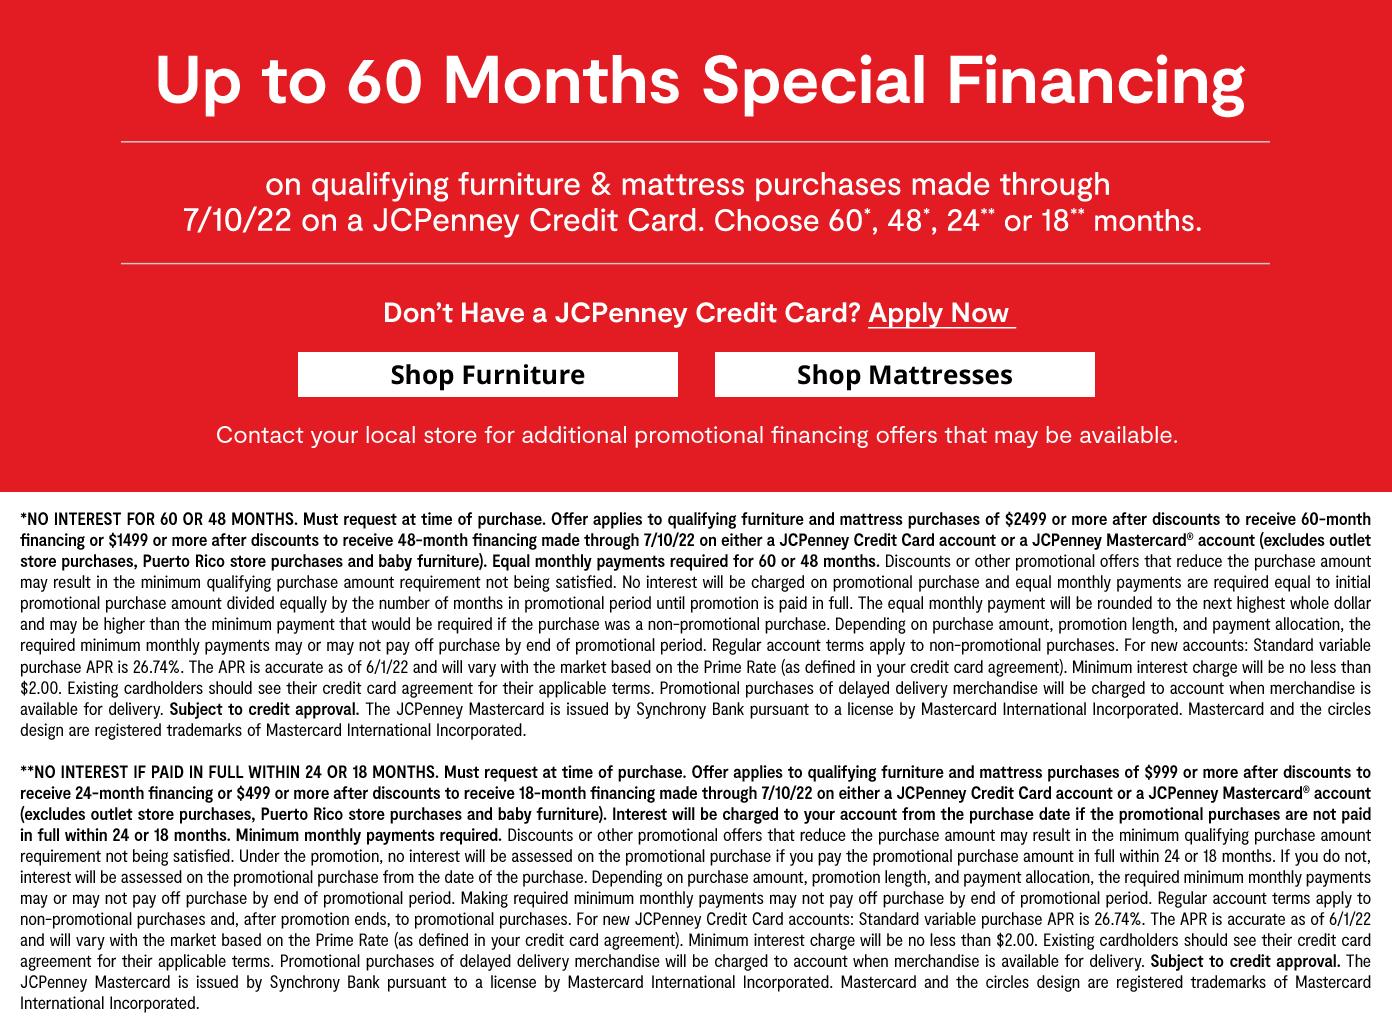 Up to 60 months special financing on qualifying furniture & mattress purchases by 7/10/22 a JCPenney credit card. choose 60, 48, 24, or 18 months learn more